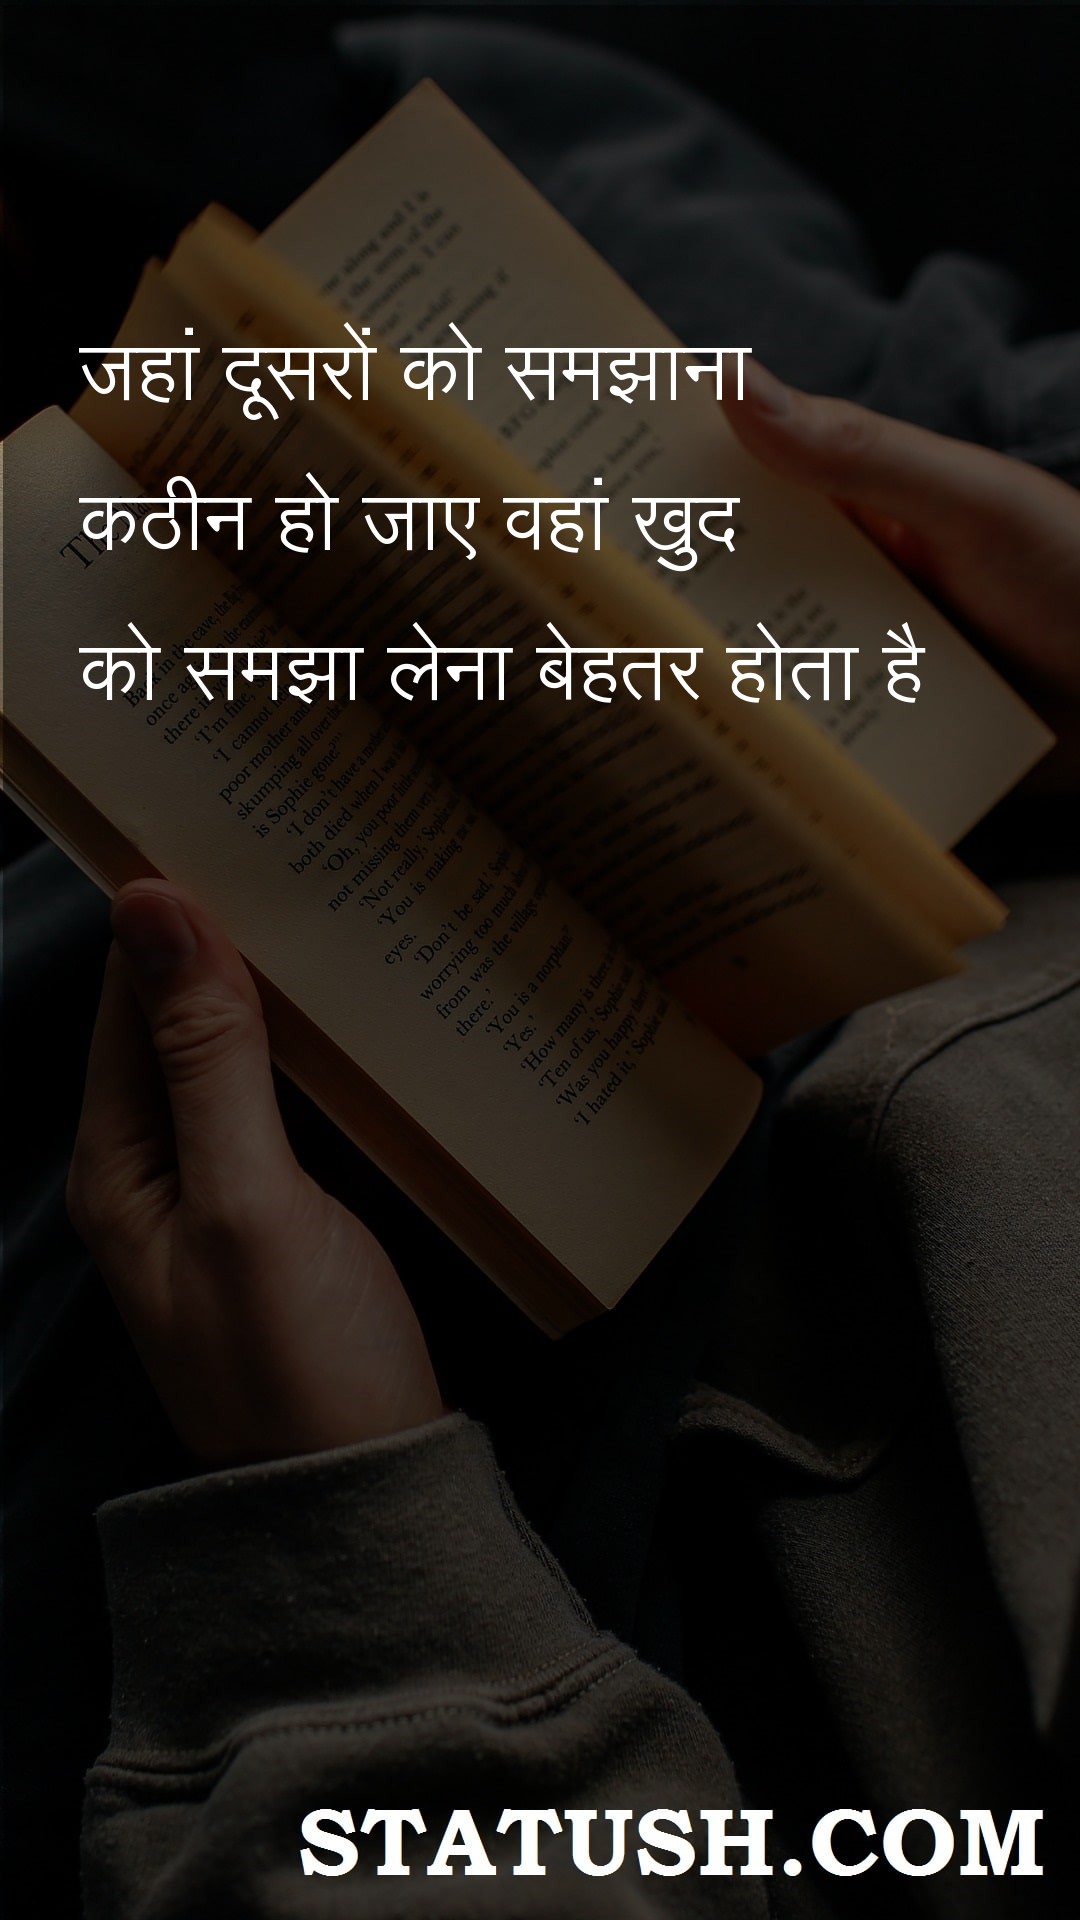 Where it becomes difficult to explain - Hindi Quotes at statush.com